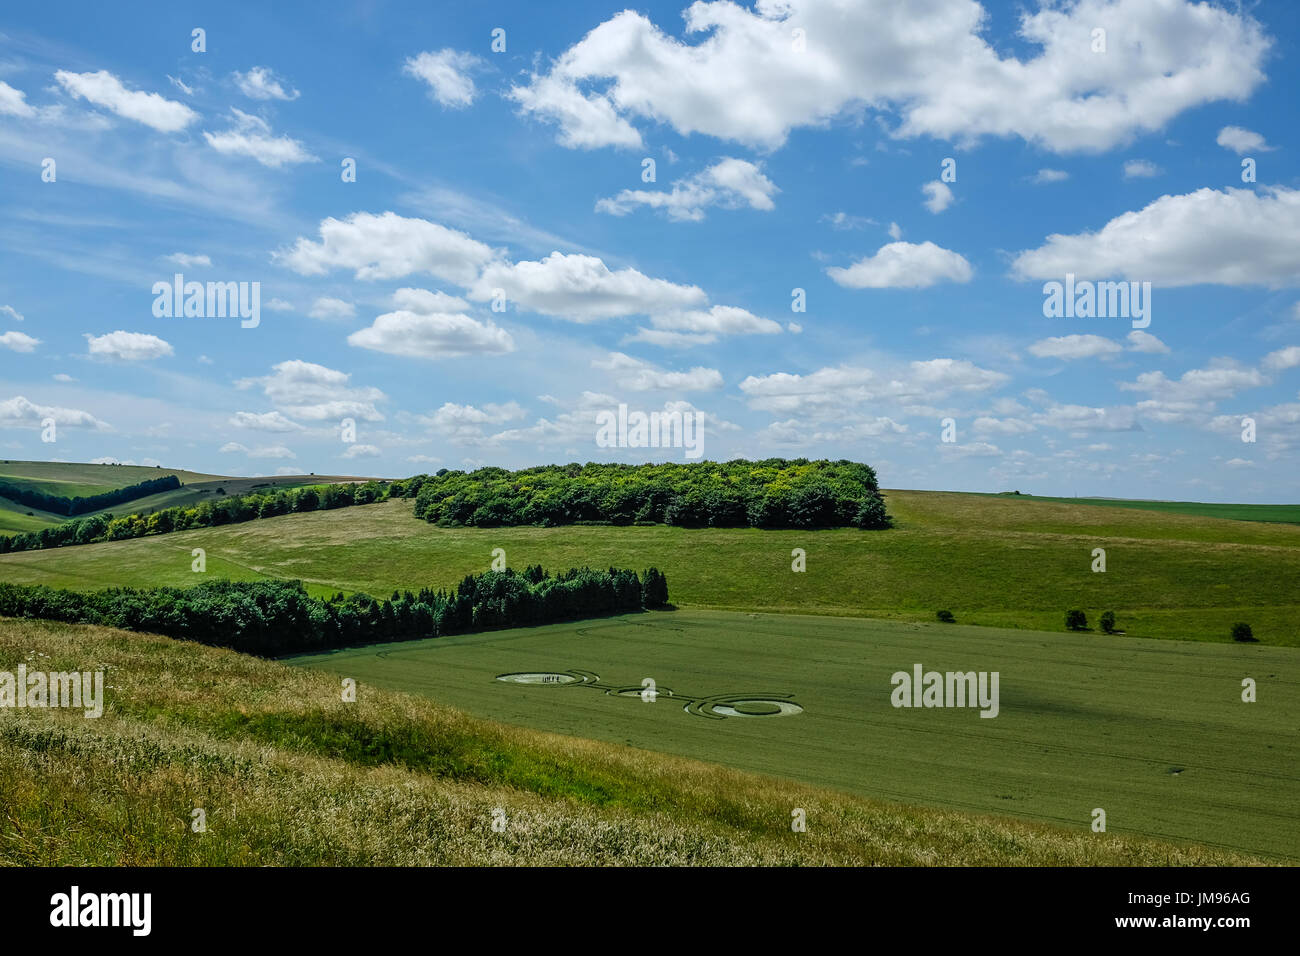 Crop circle in field with blue sky and clouds Stock Photo